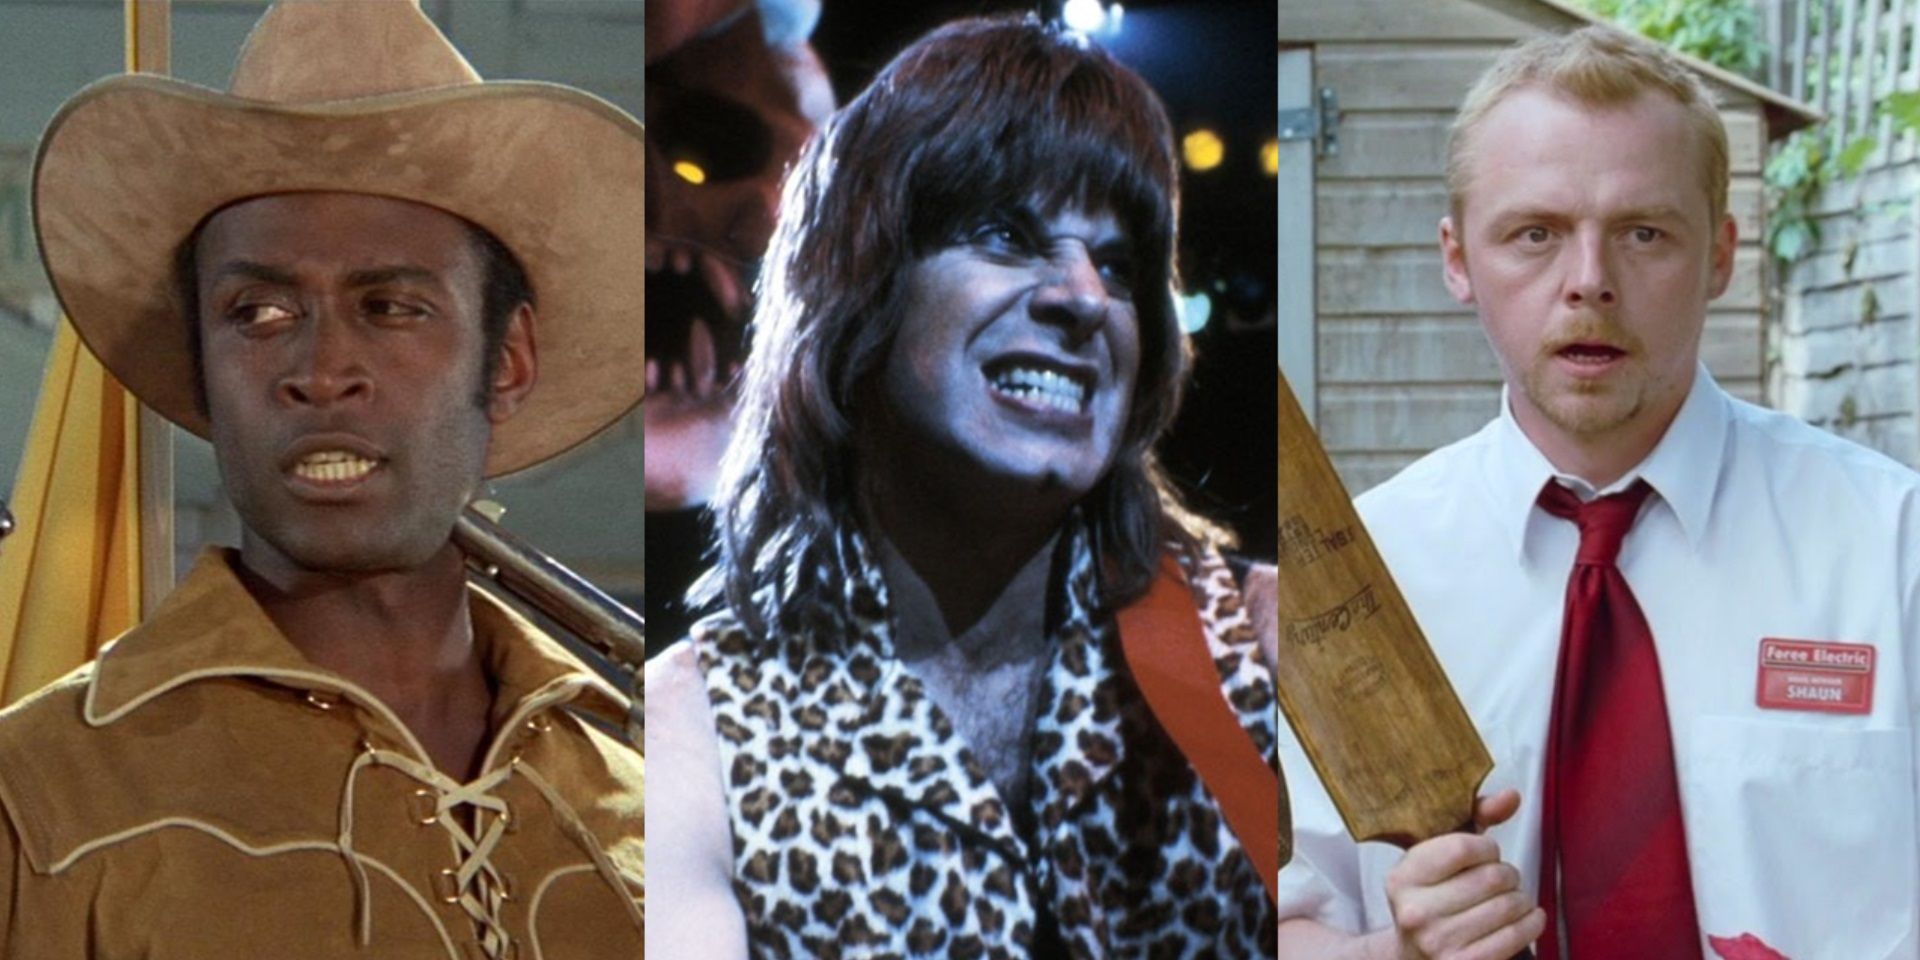 Split image of Bart in Blazing Saddles, Nigel in This is Spinal Tap, and Shaun in Shaun of the Dead